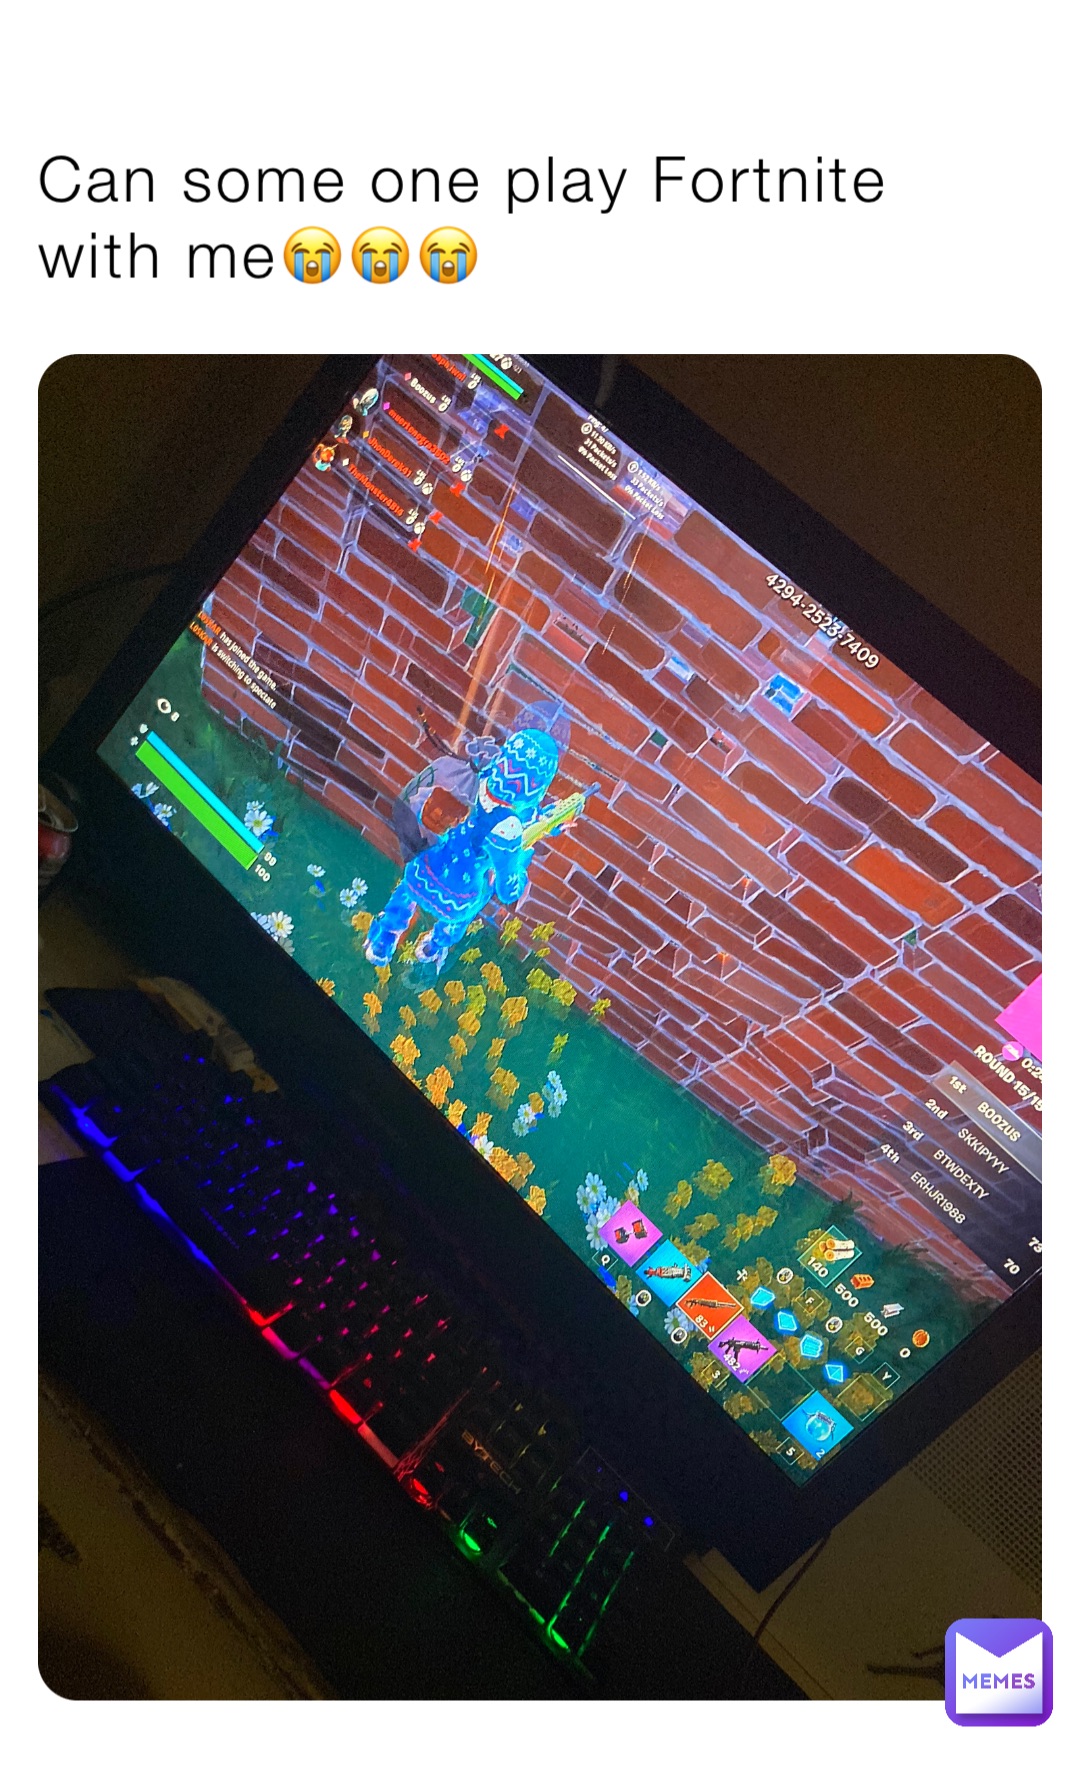 Can some one play Fortnite with me😭😭😭